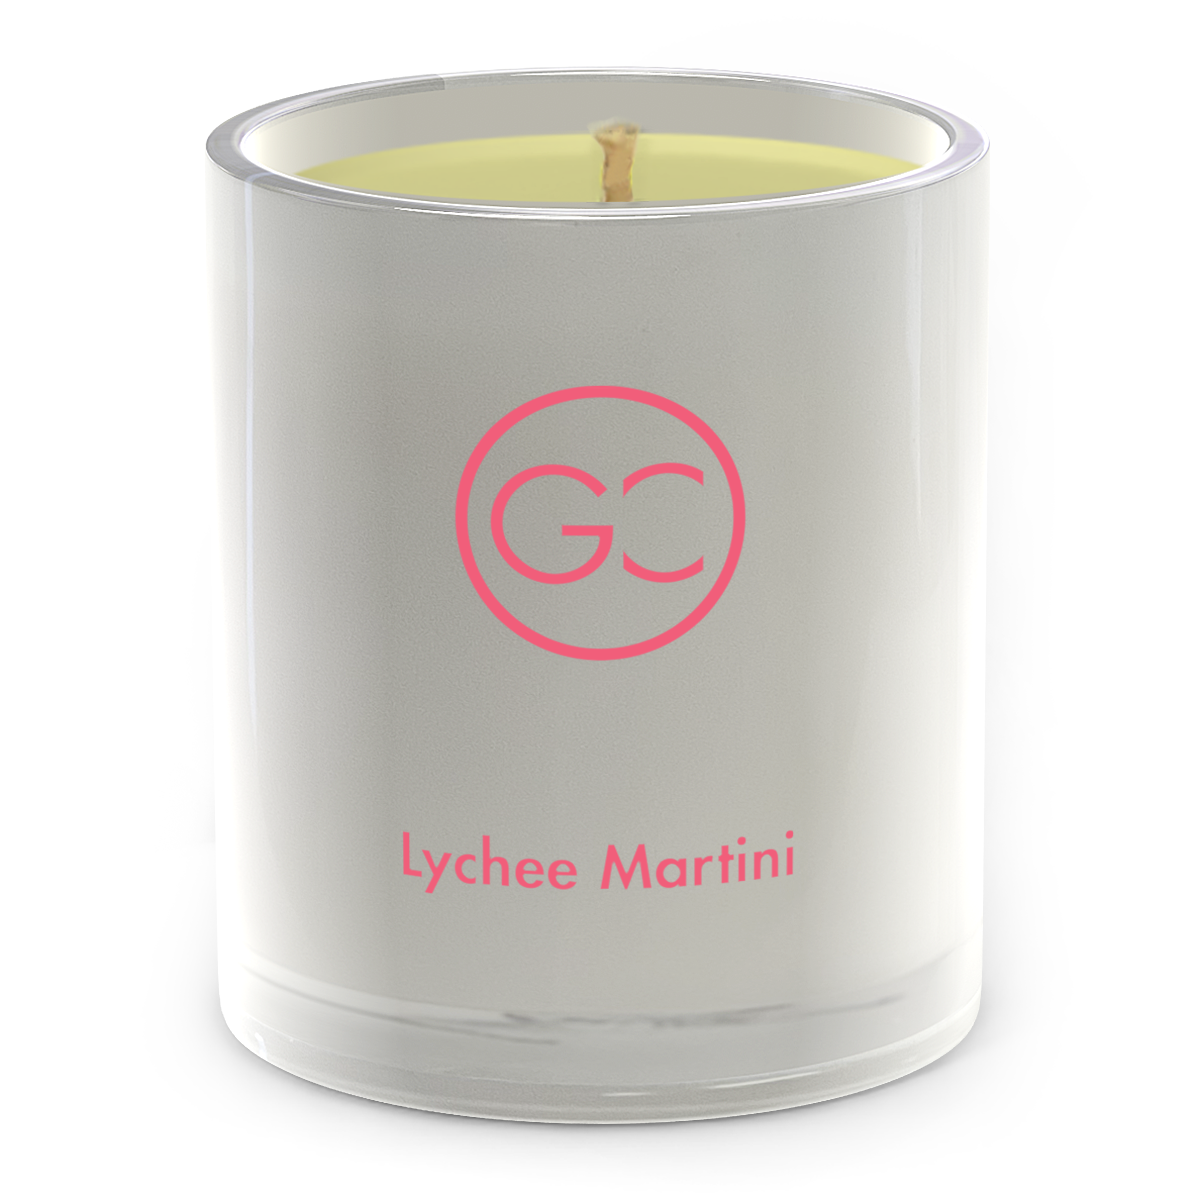 Lychee Martini Scented Soy Candle 55hr Burn